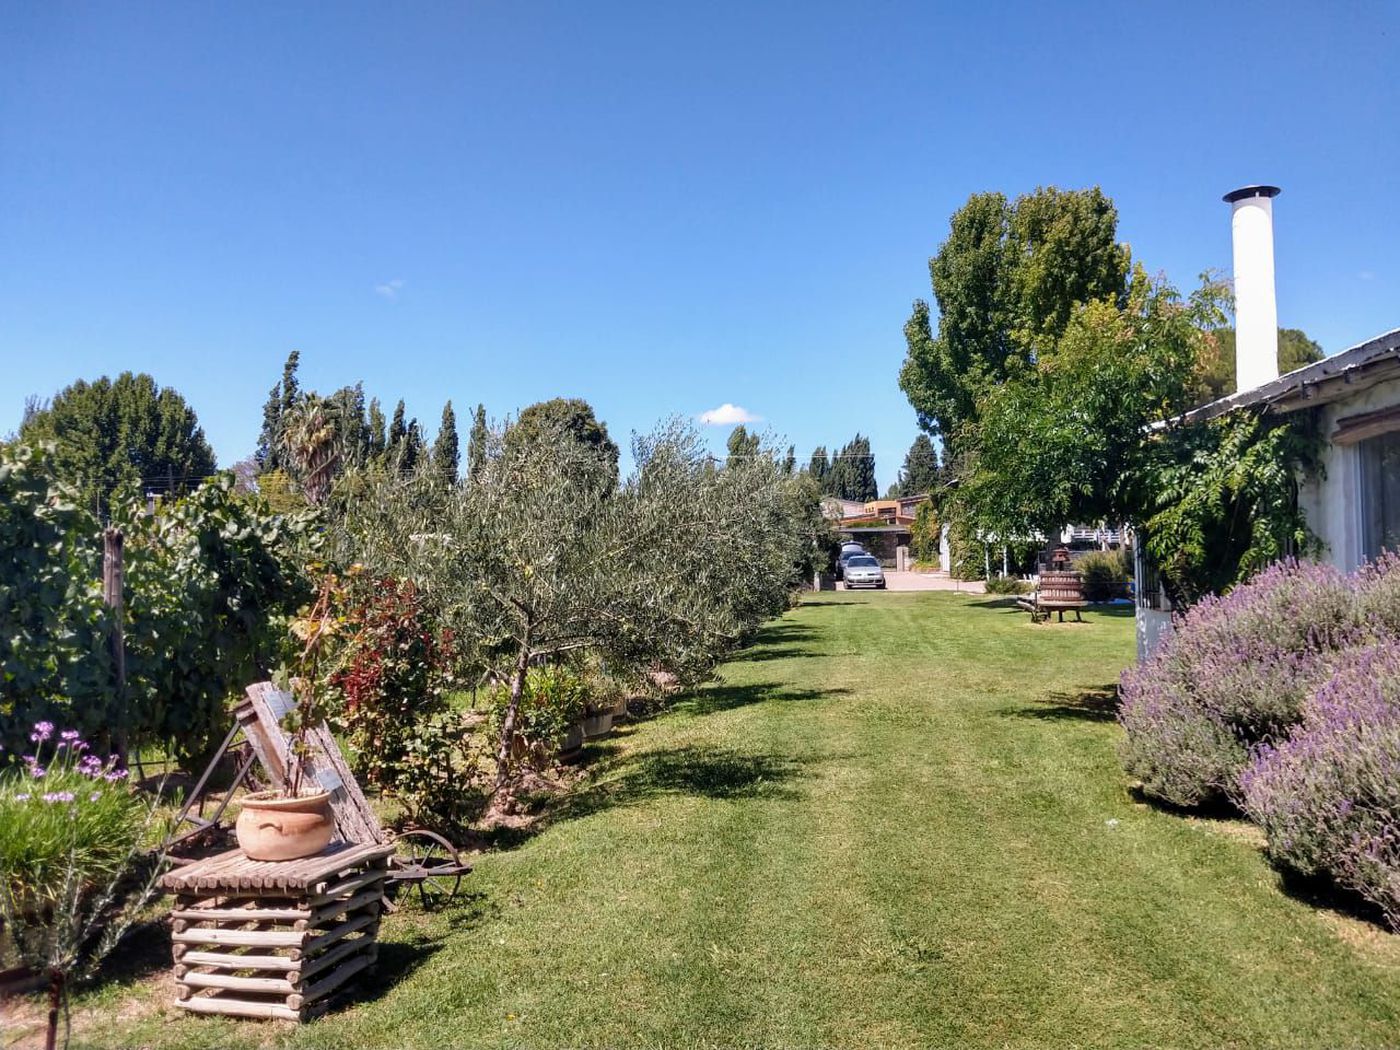 Garden with Olive trees, in Mendoza, Argentina